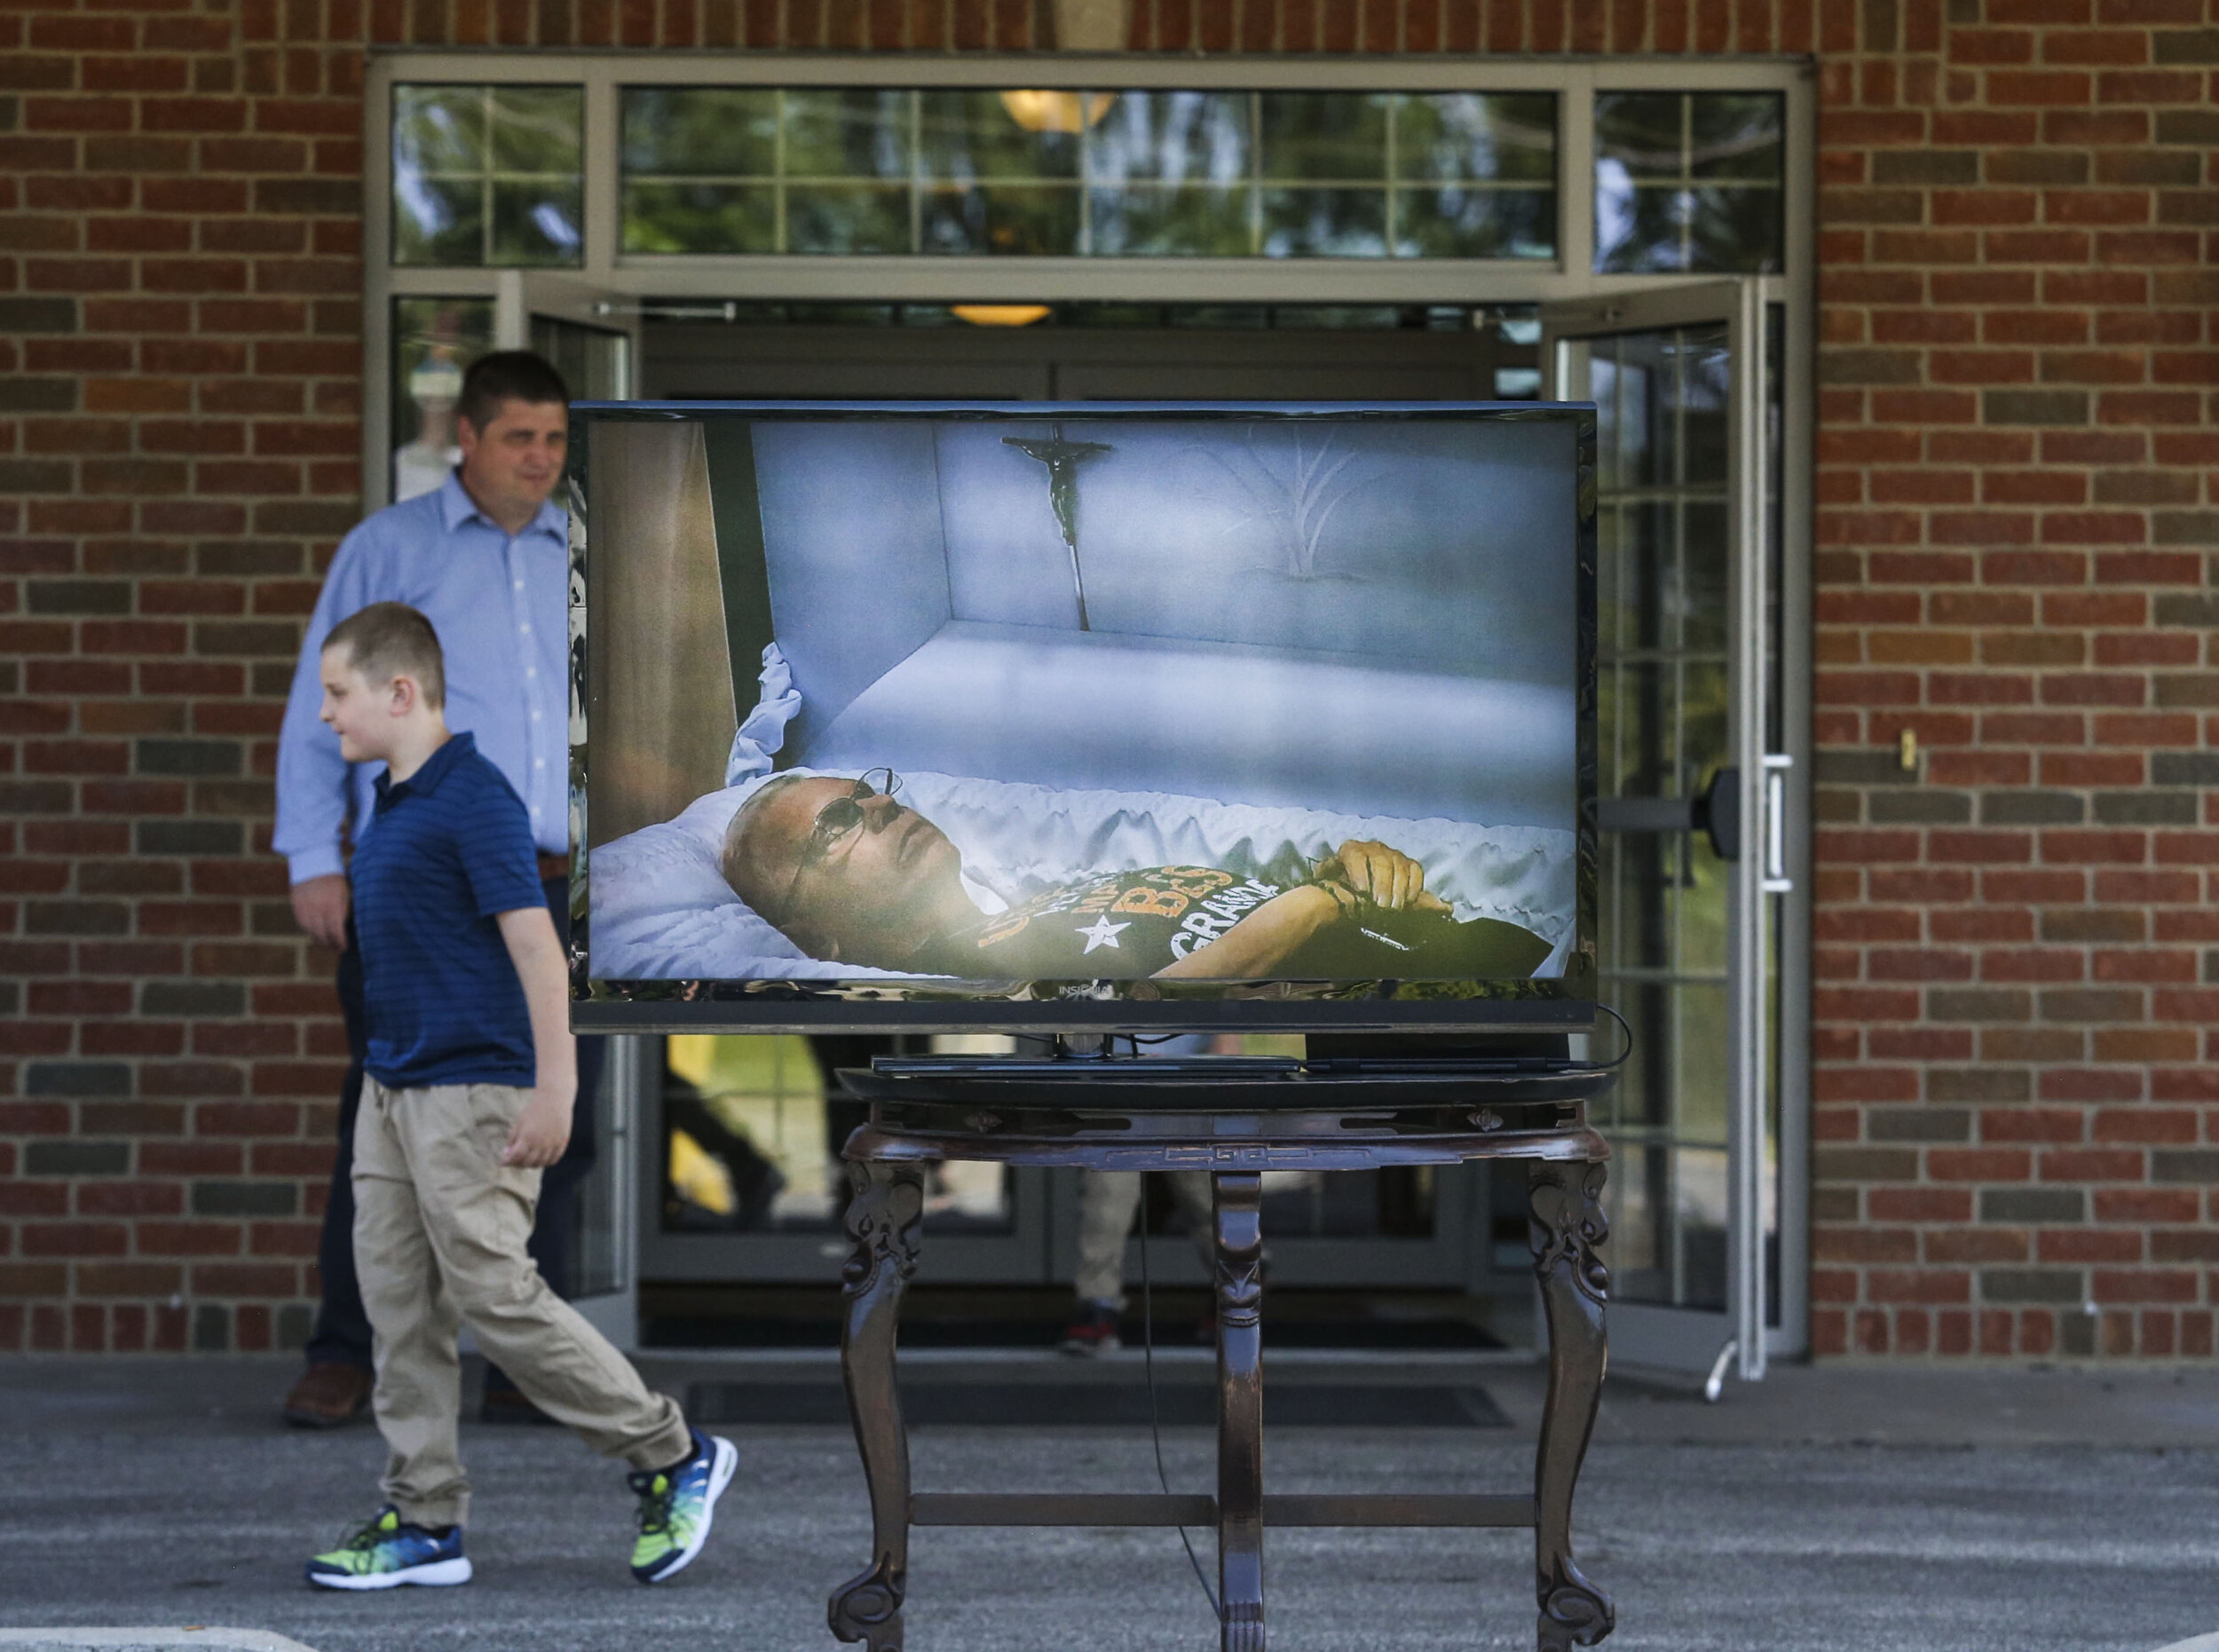  Jason Gustafson and his son Adrew Gustafson, 8, of Cambridge walk behind a television that live streams their family member Joseph Bernard Burns' casket during a drive-thru only visitation. Sunday, June 14, 2020 at Wheelan-Pressly Funeral Home and C